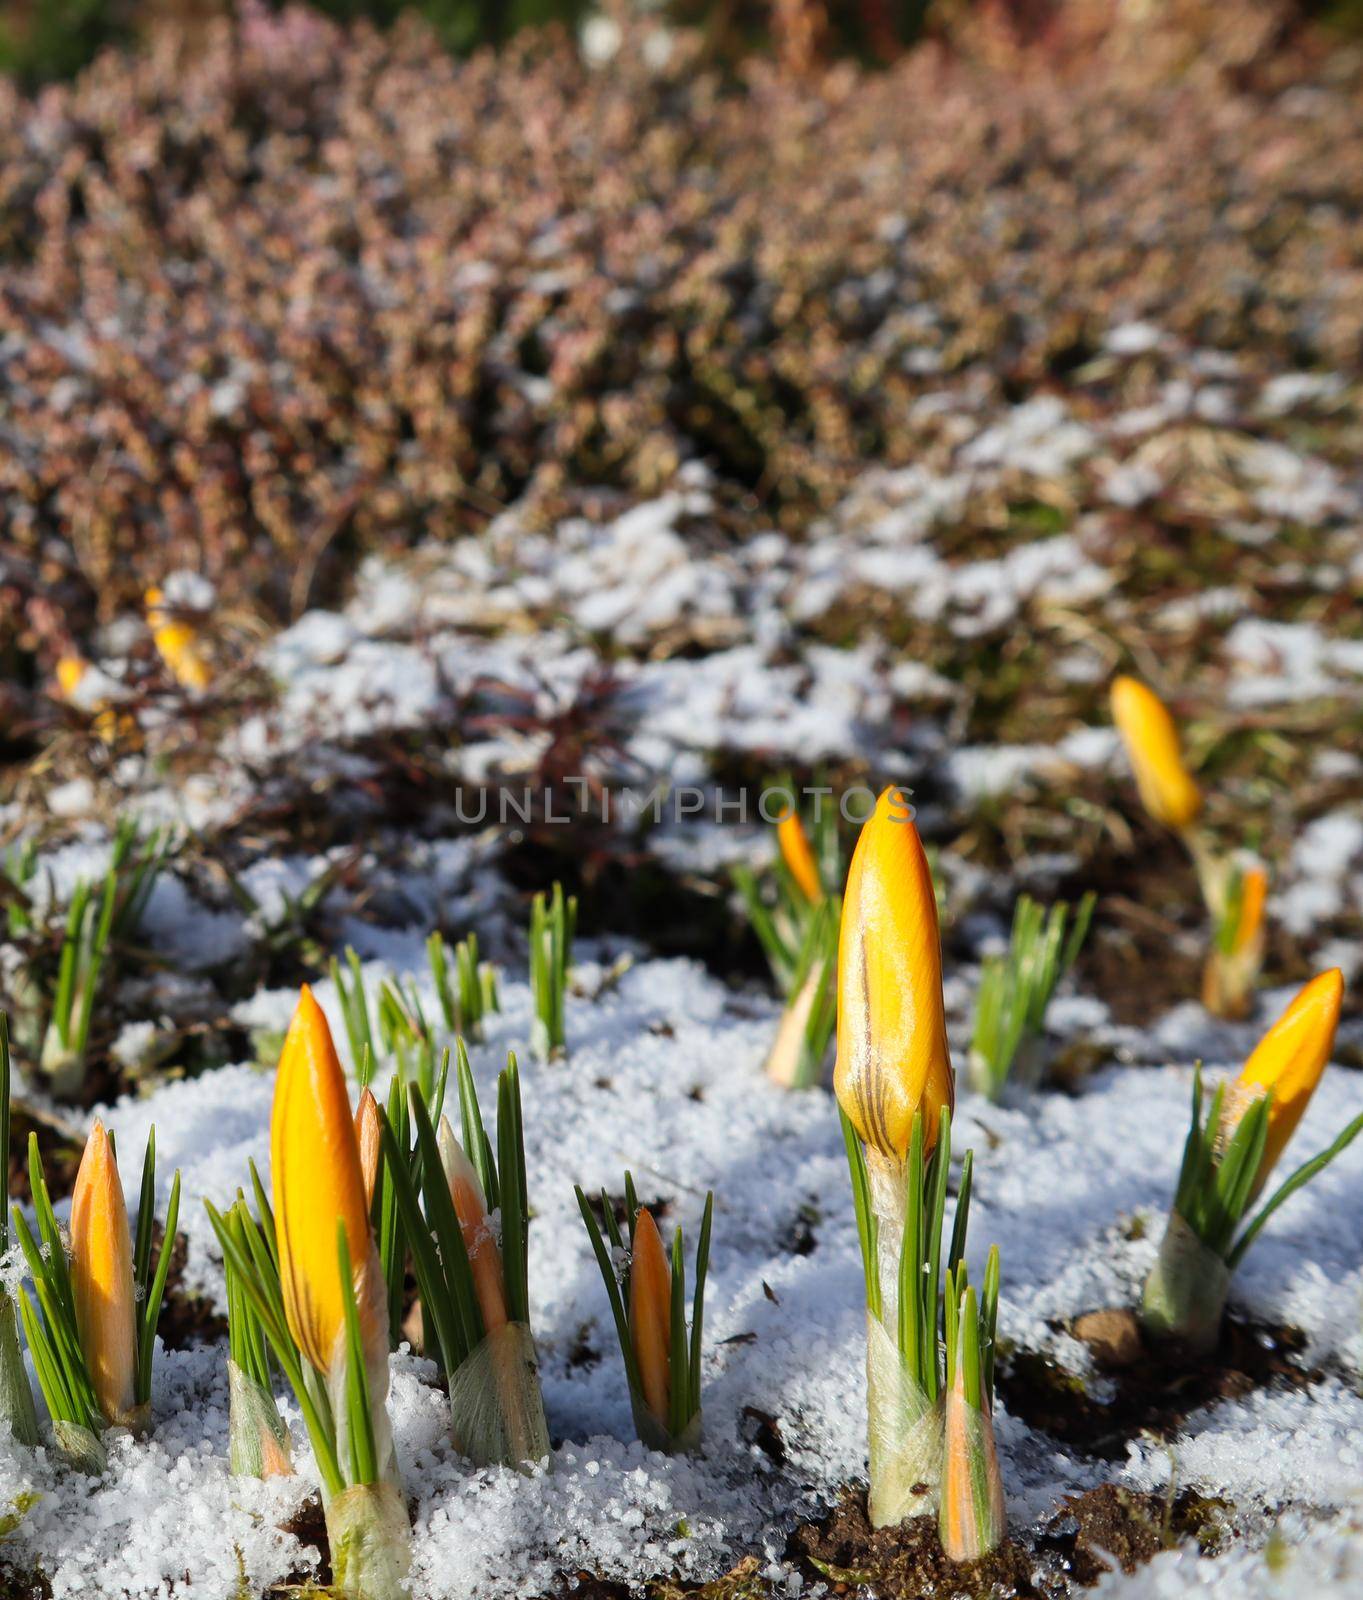 The first crocuses from under the snow in the spring garden